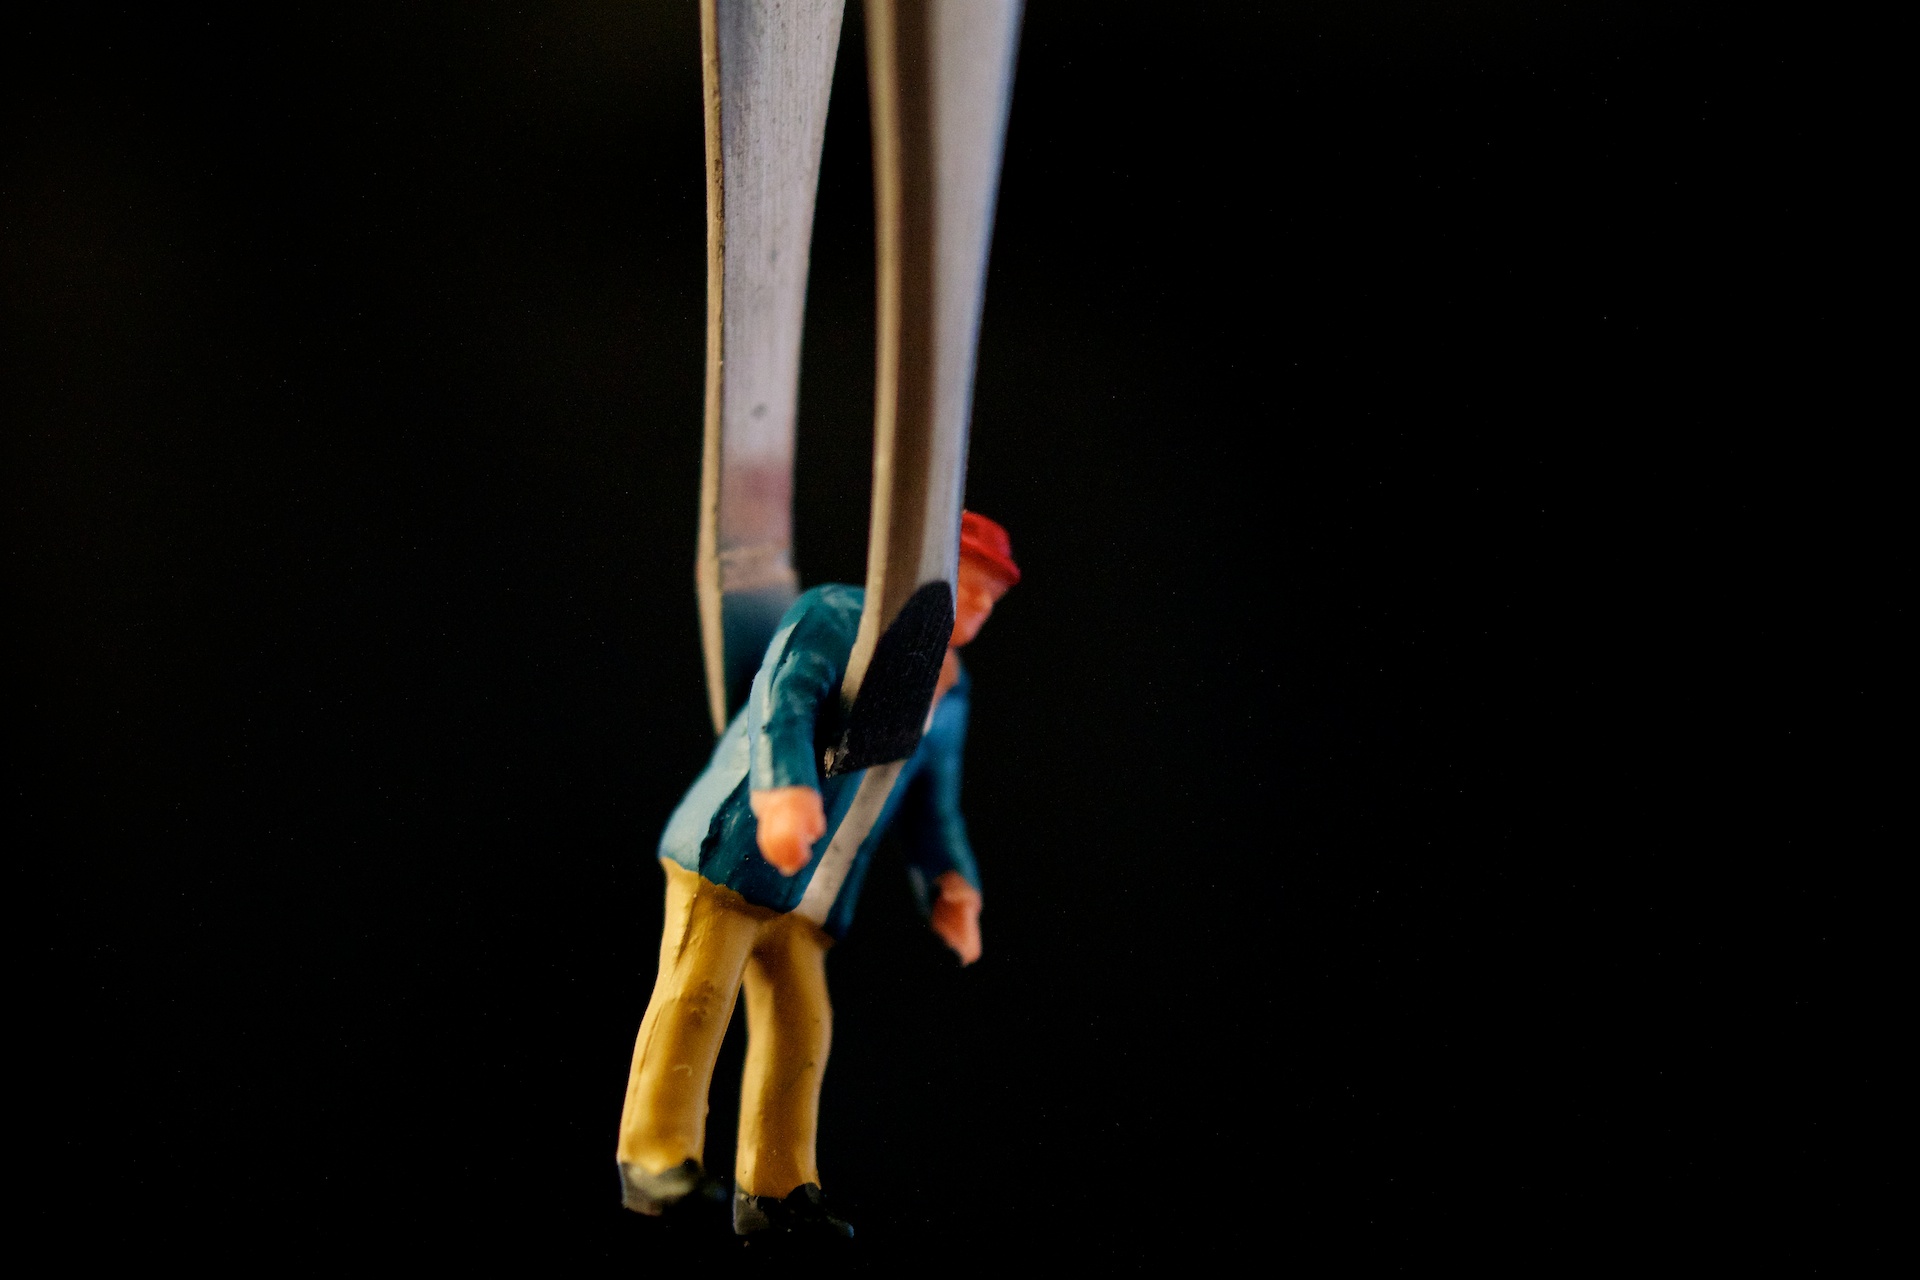 two different colored toy figures holding together on the end of some strings